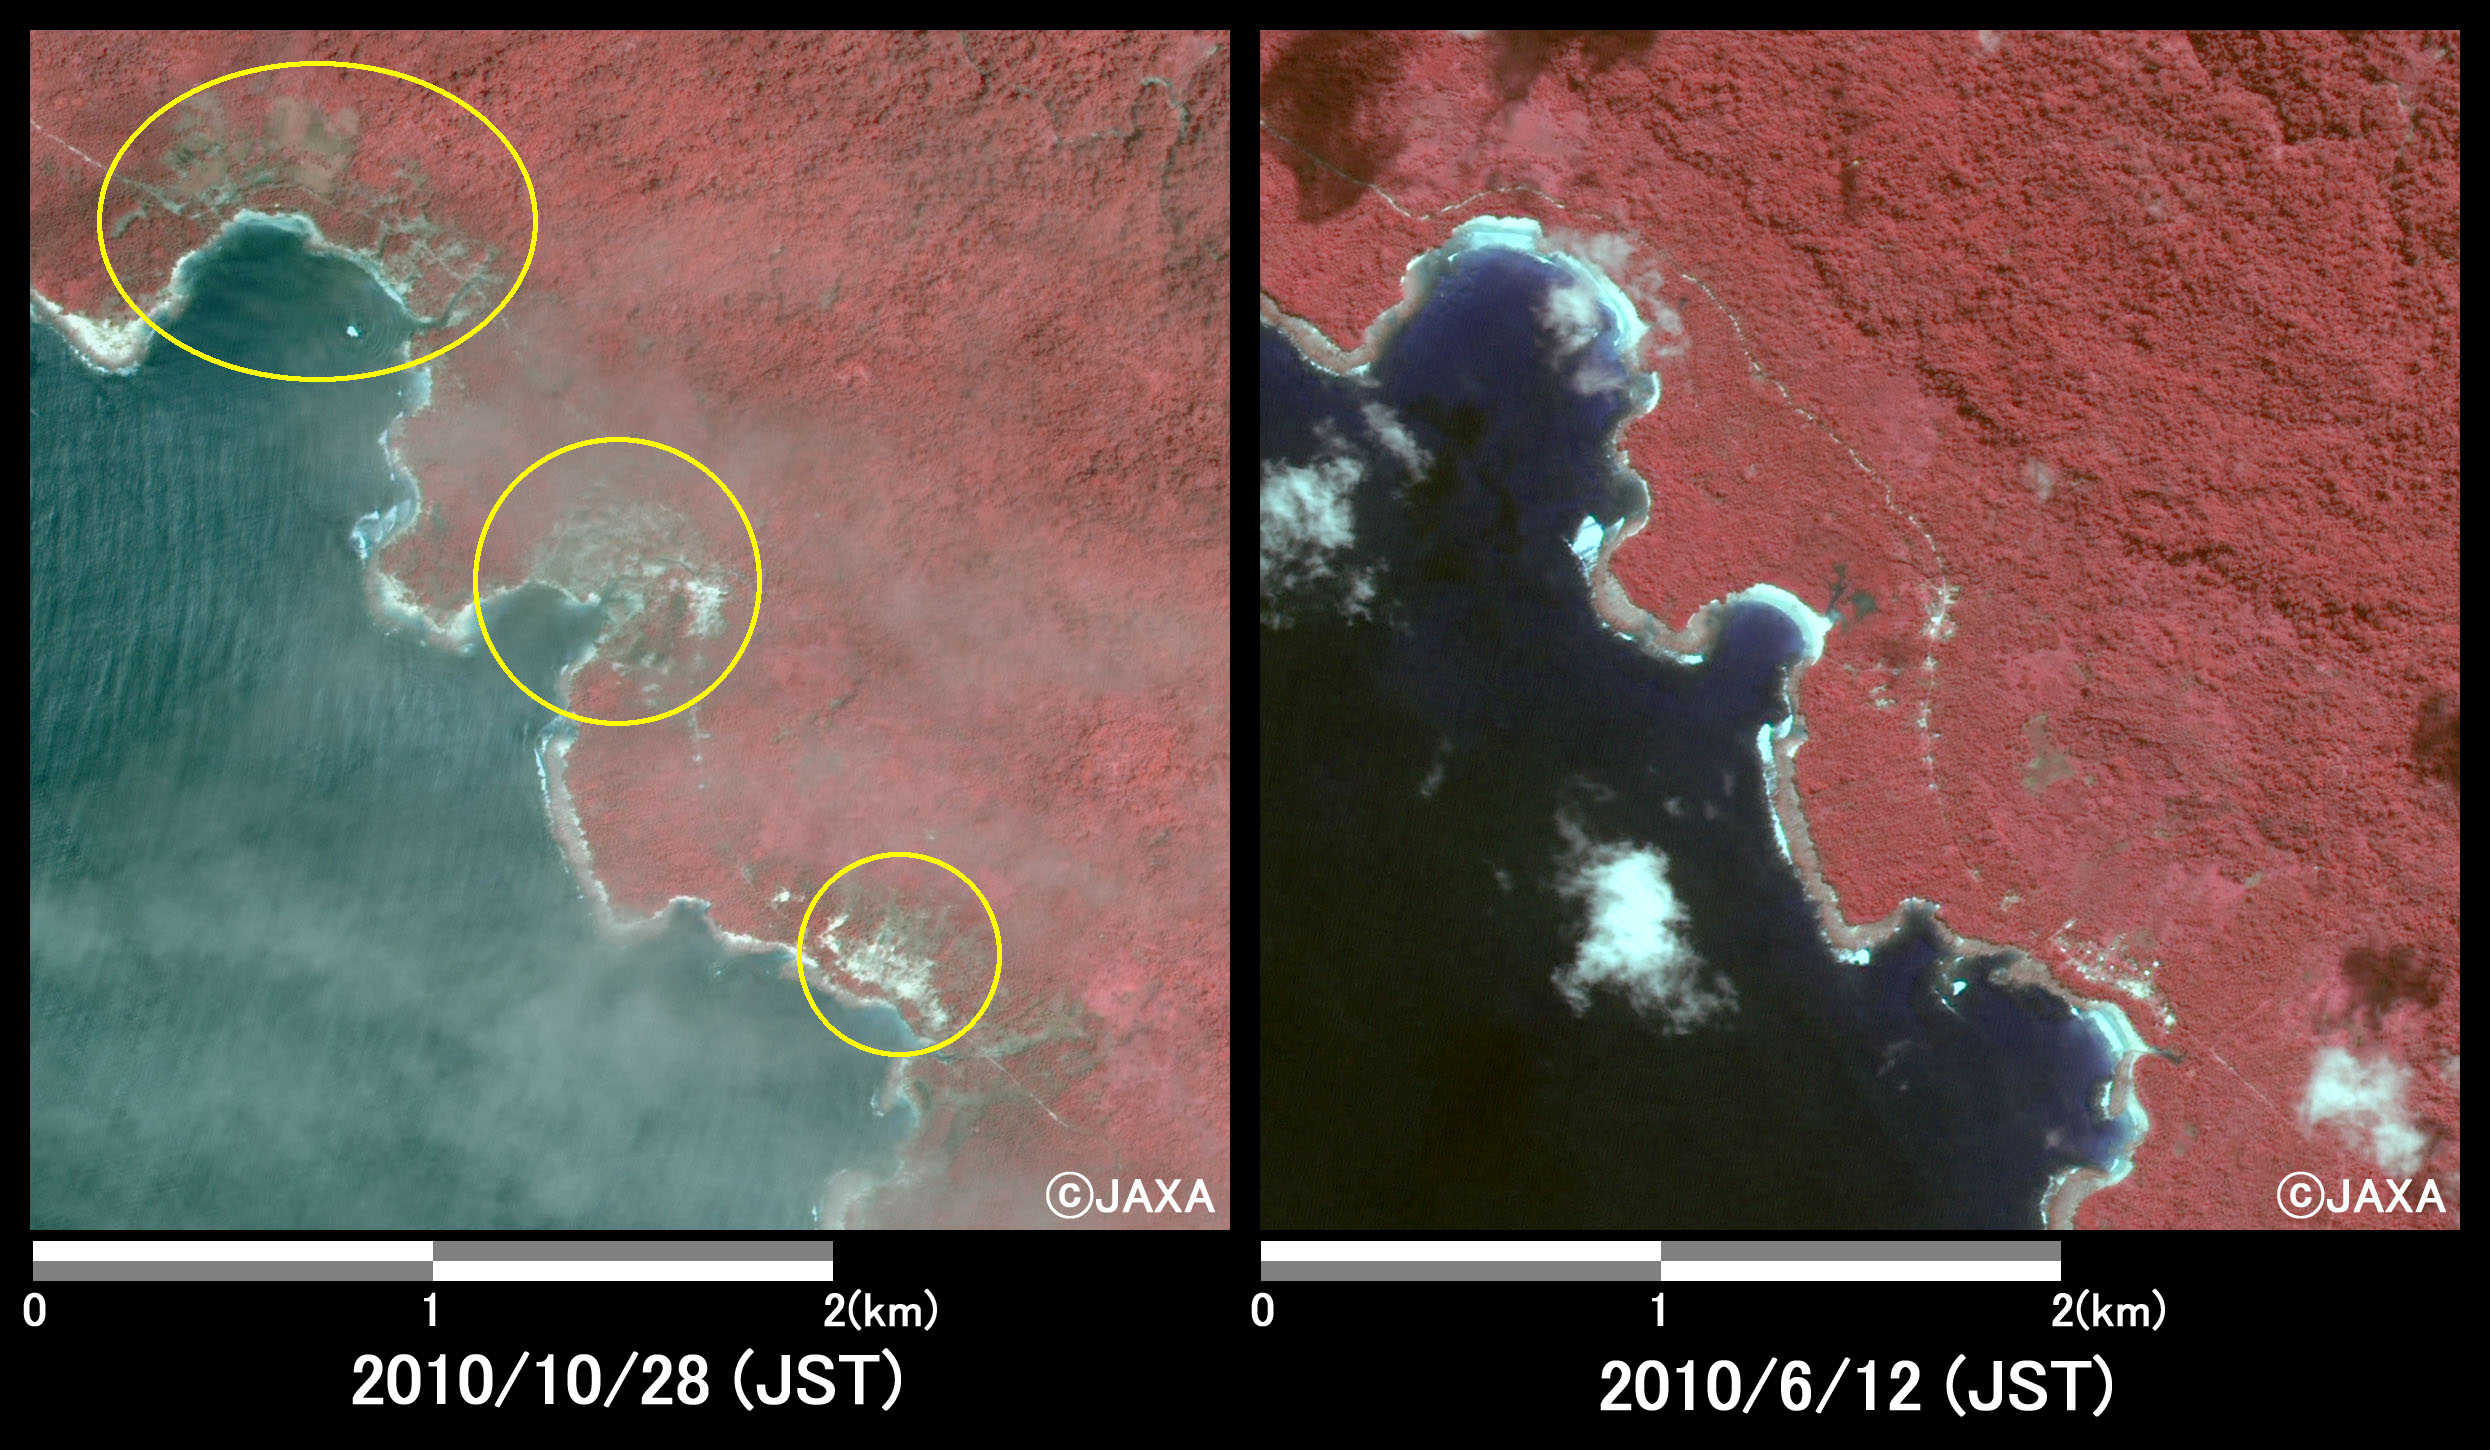 Fig.2: Enlarged images at the coast in South Pagai Island (9 square kilometers, left: October 28, 2010; right: June 12, 2010).